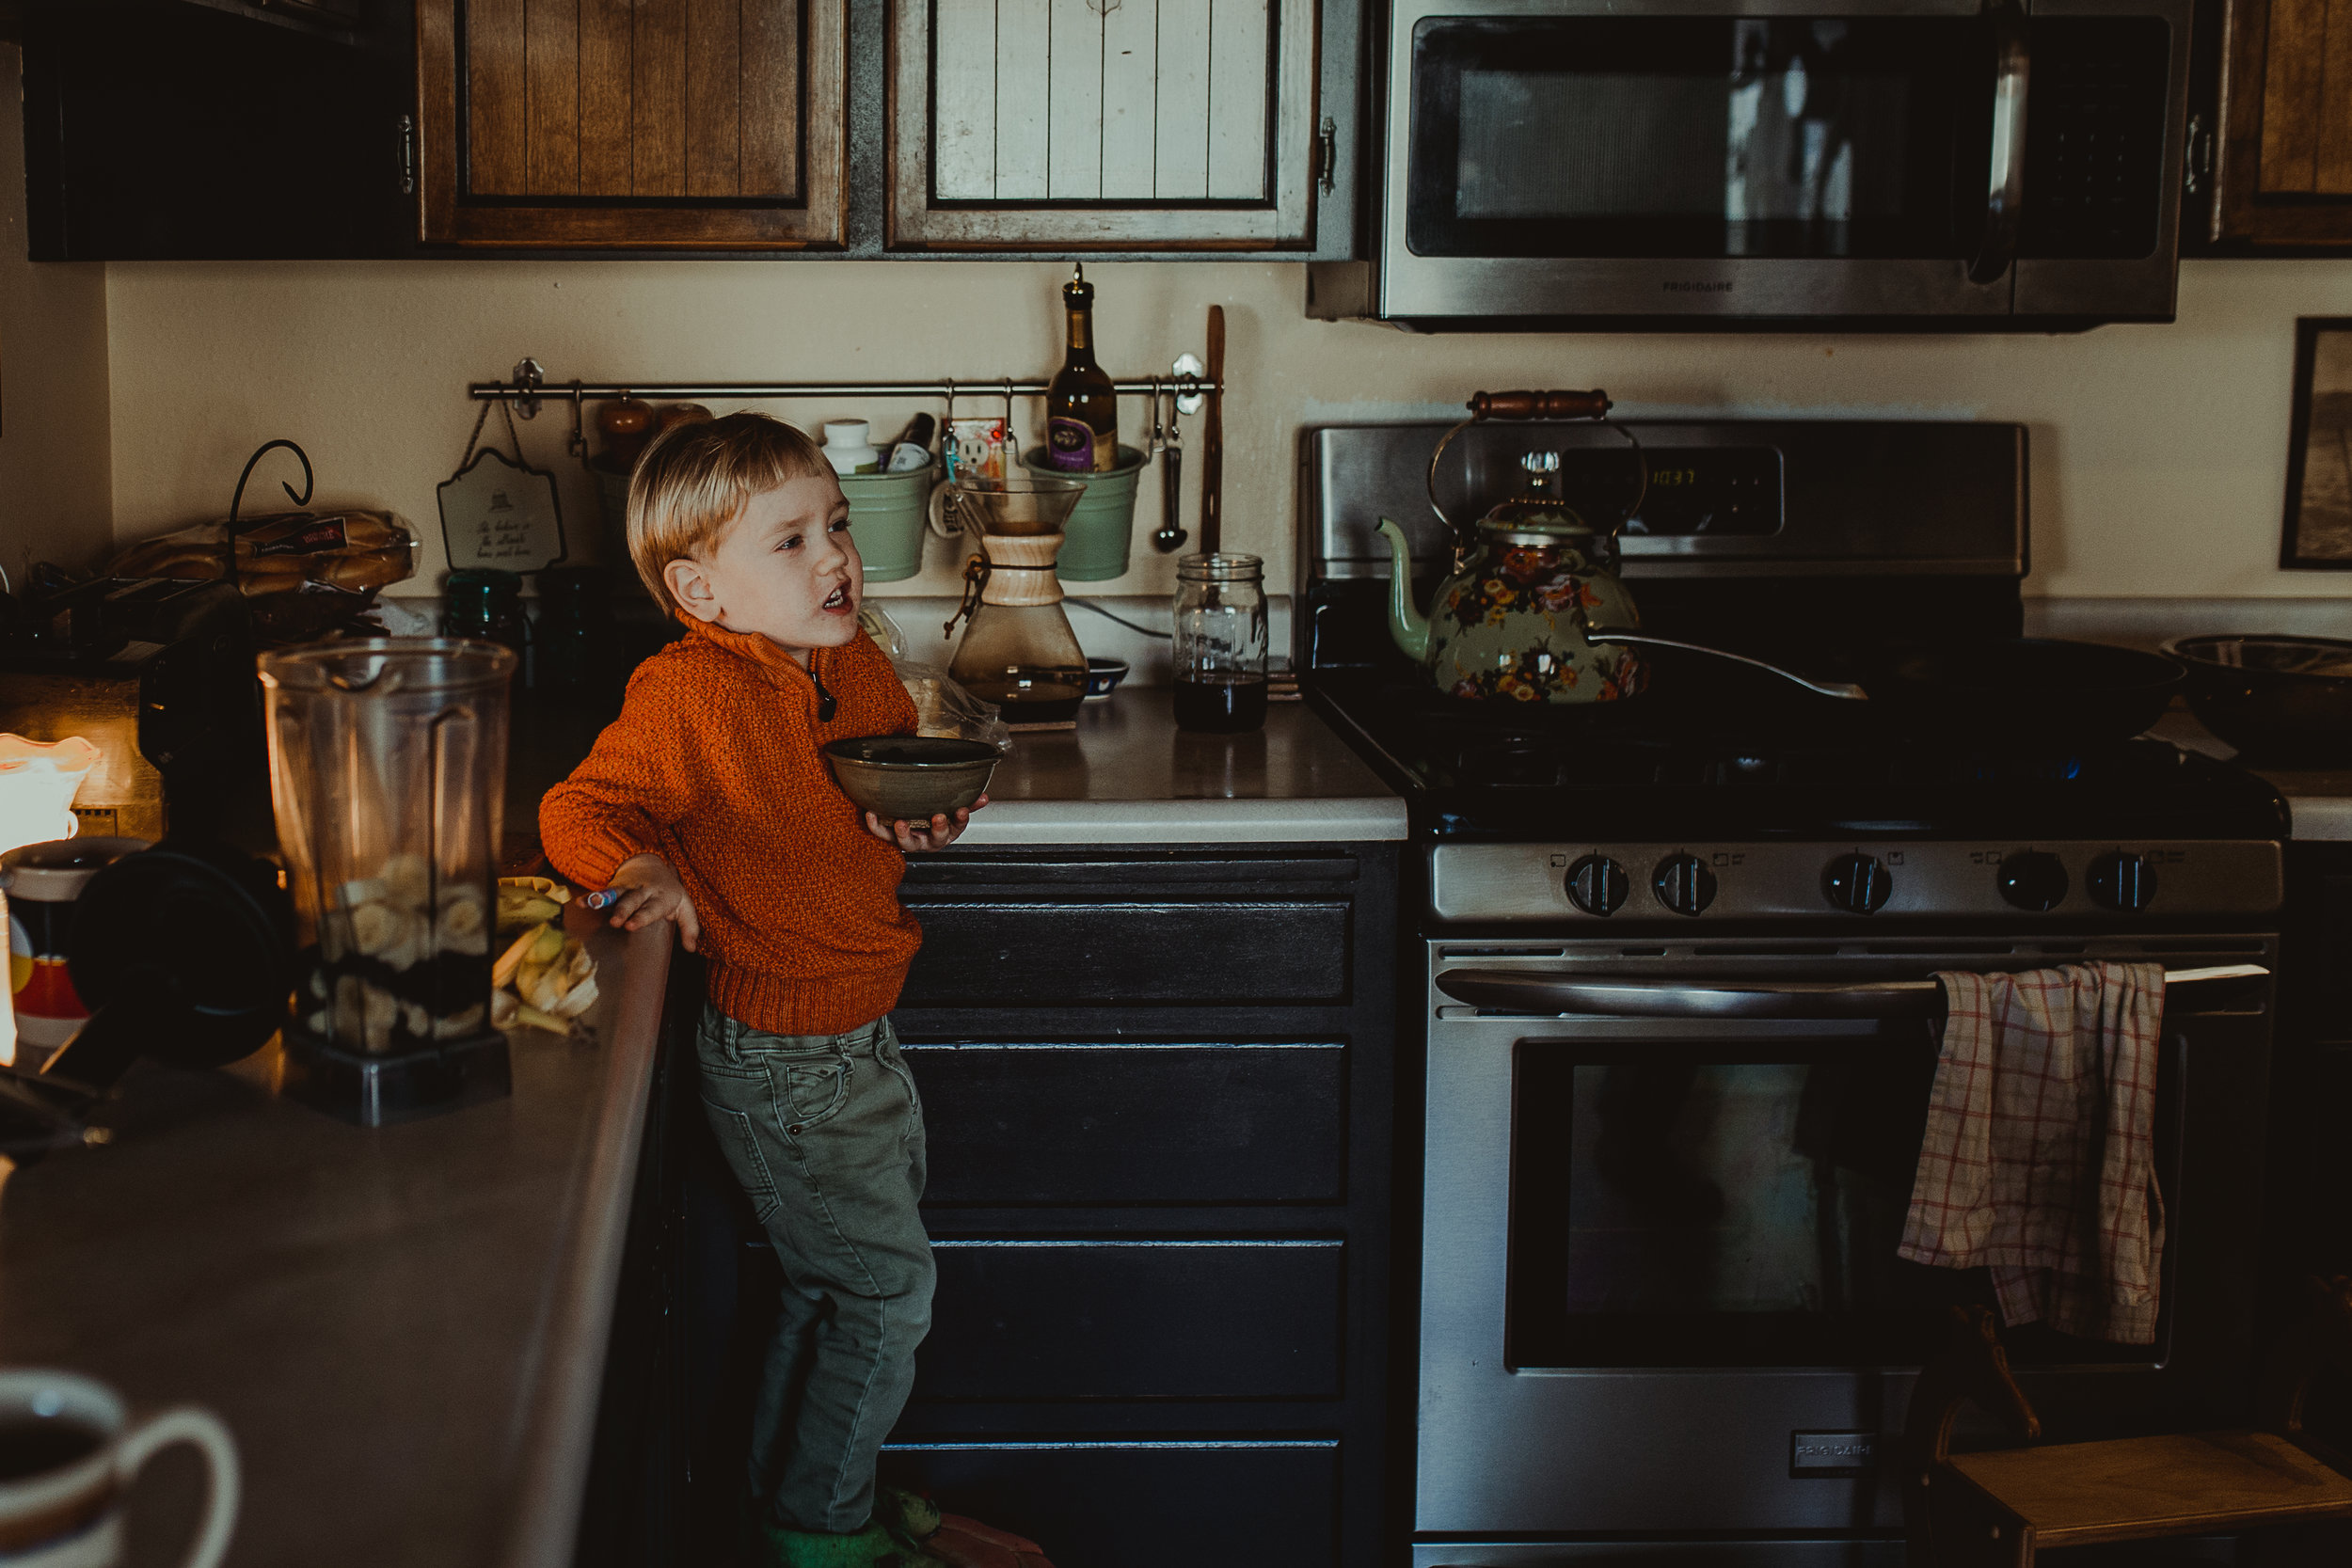  Boy holding blueberries in bowl 